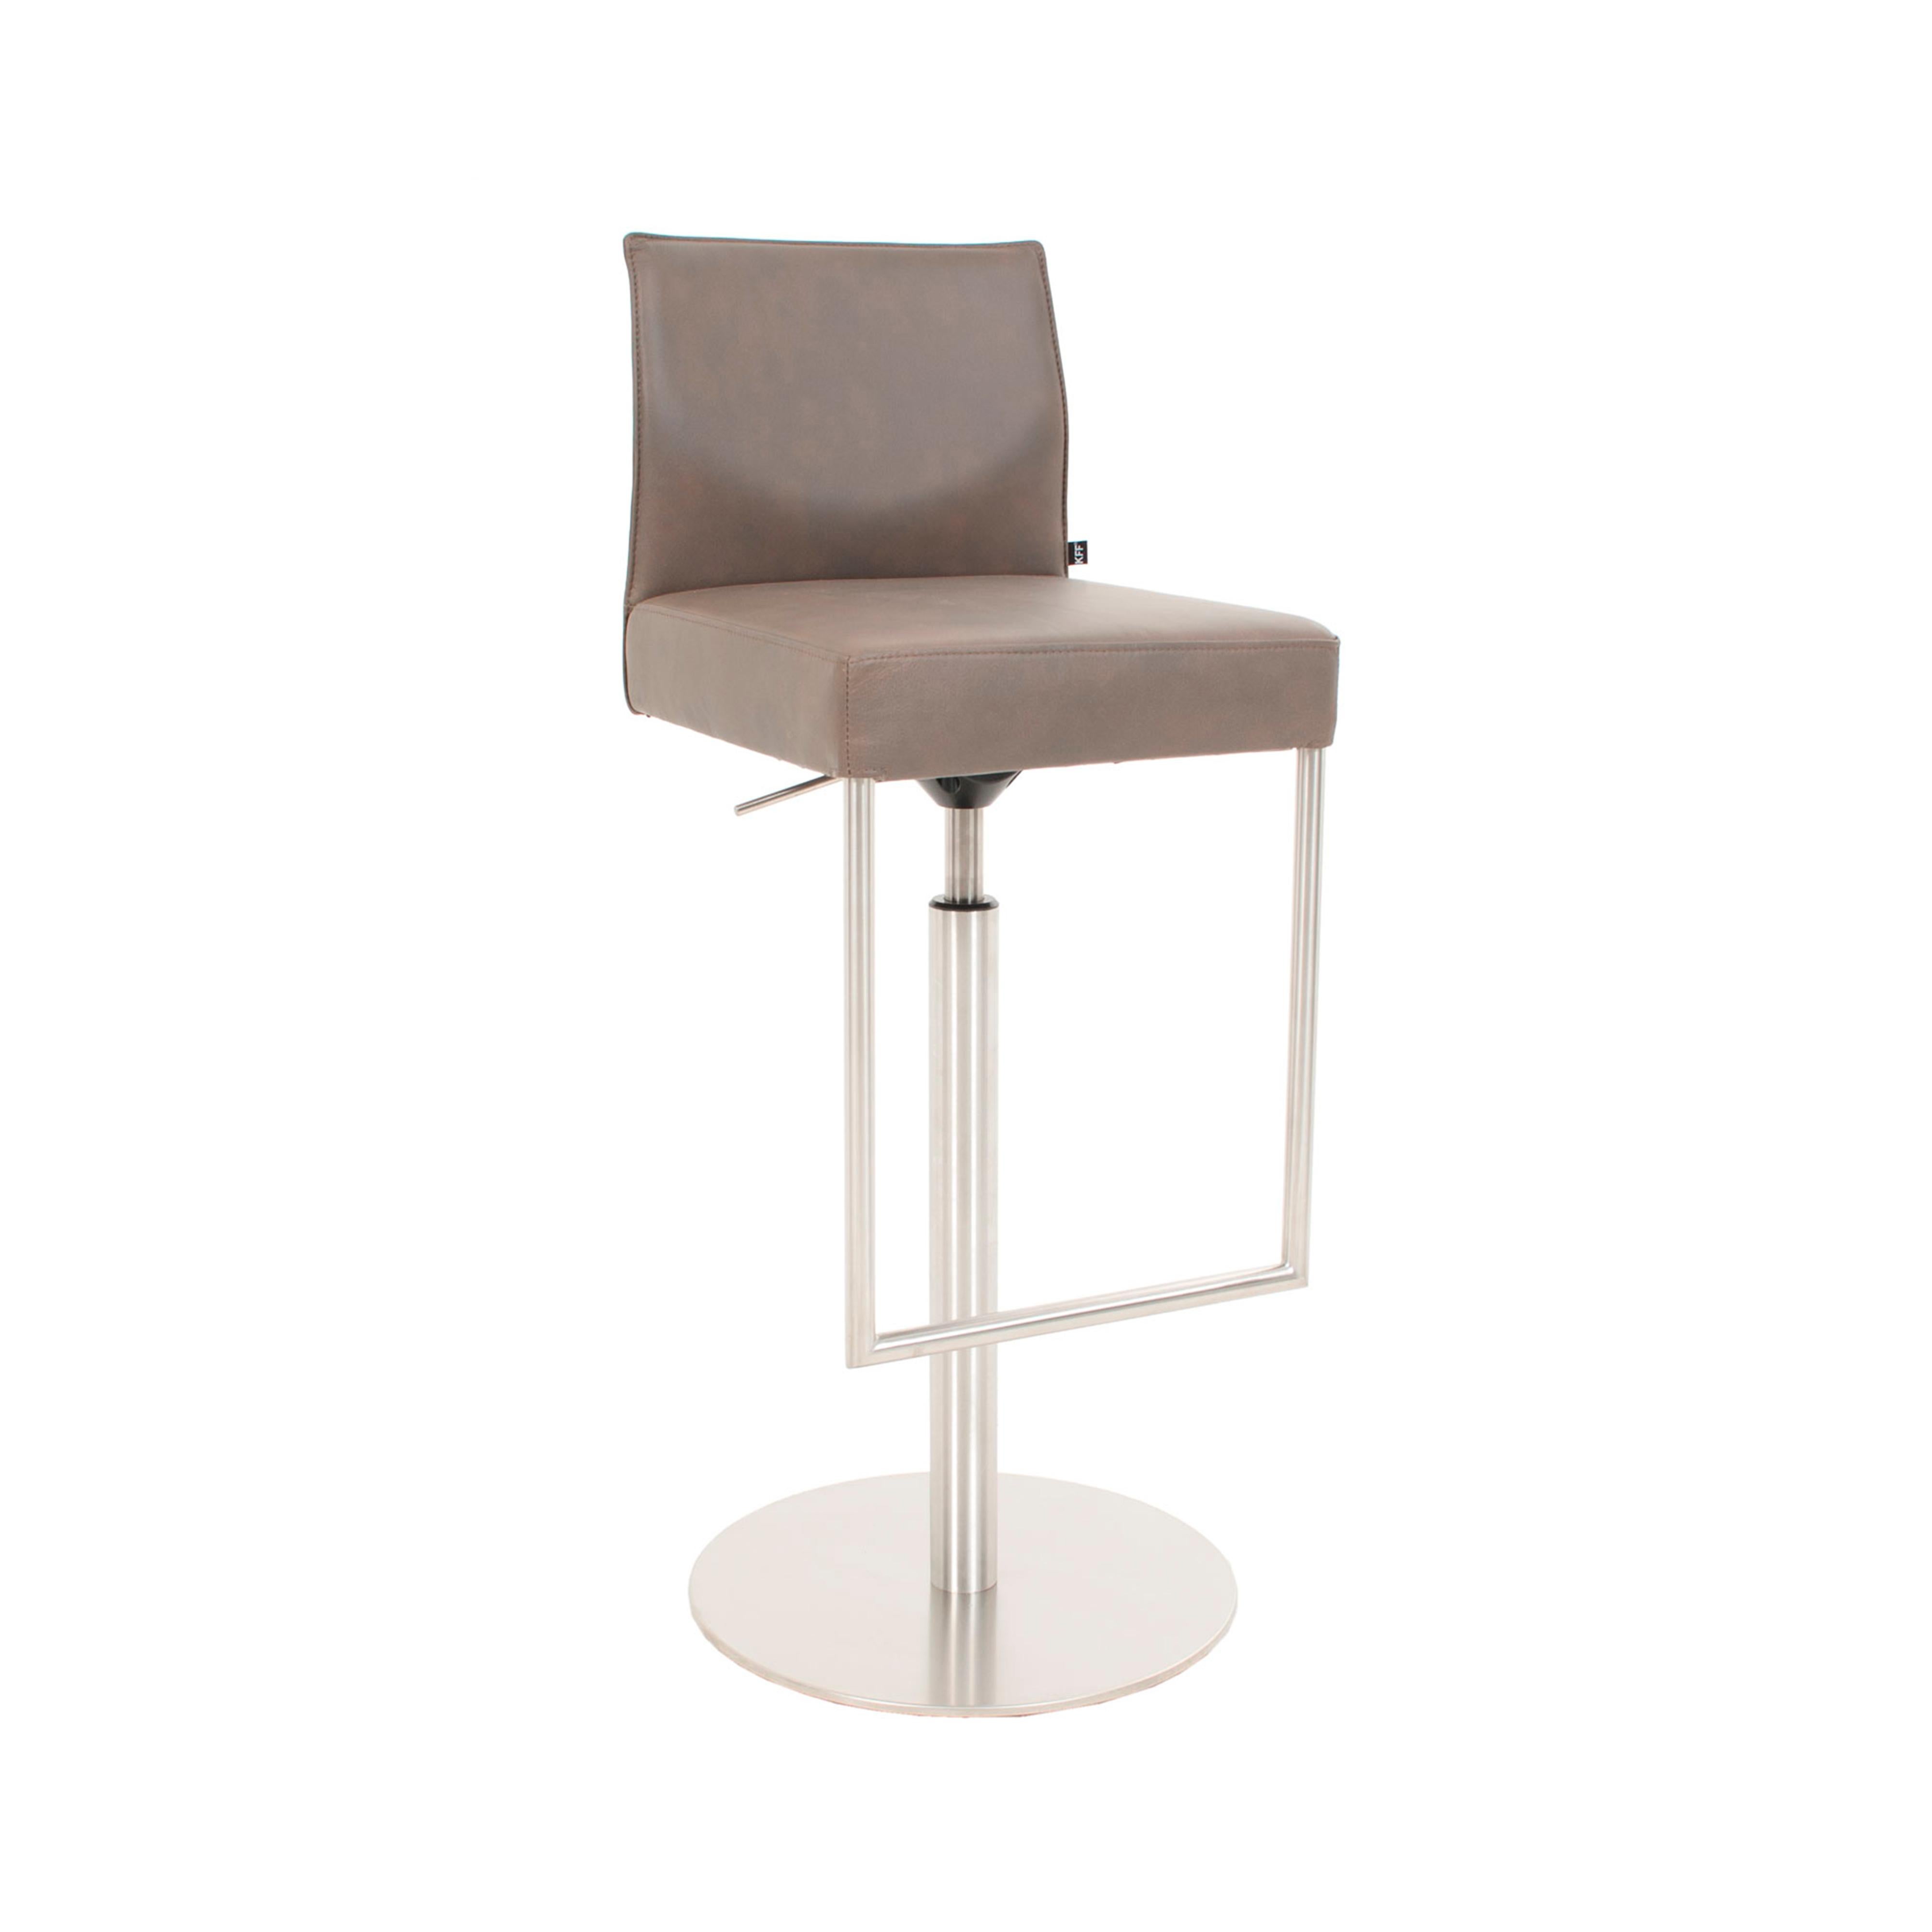 One design concept — many prototypes: be they conventional chairs, catilevers or barstools including the pneumatic spring type, GLOOH, aside from having an extensive range and comfort to offer, conveys an unmistakable design. Small wonder that GLOOH